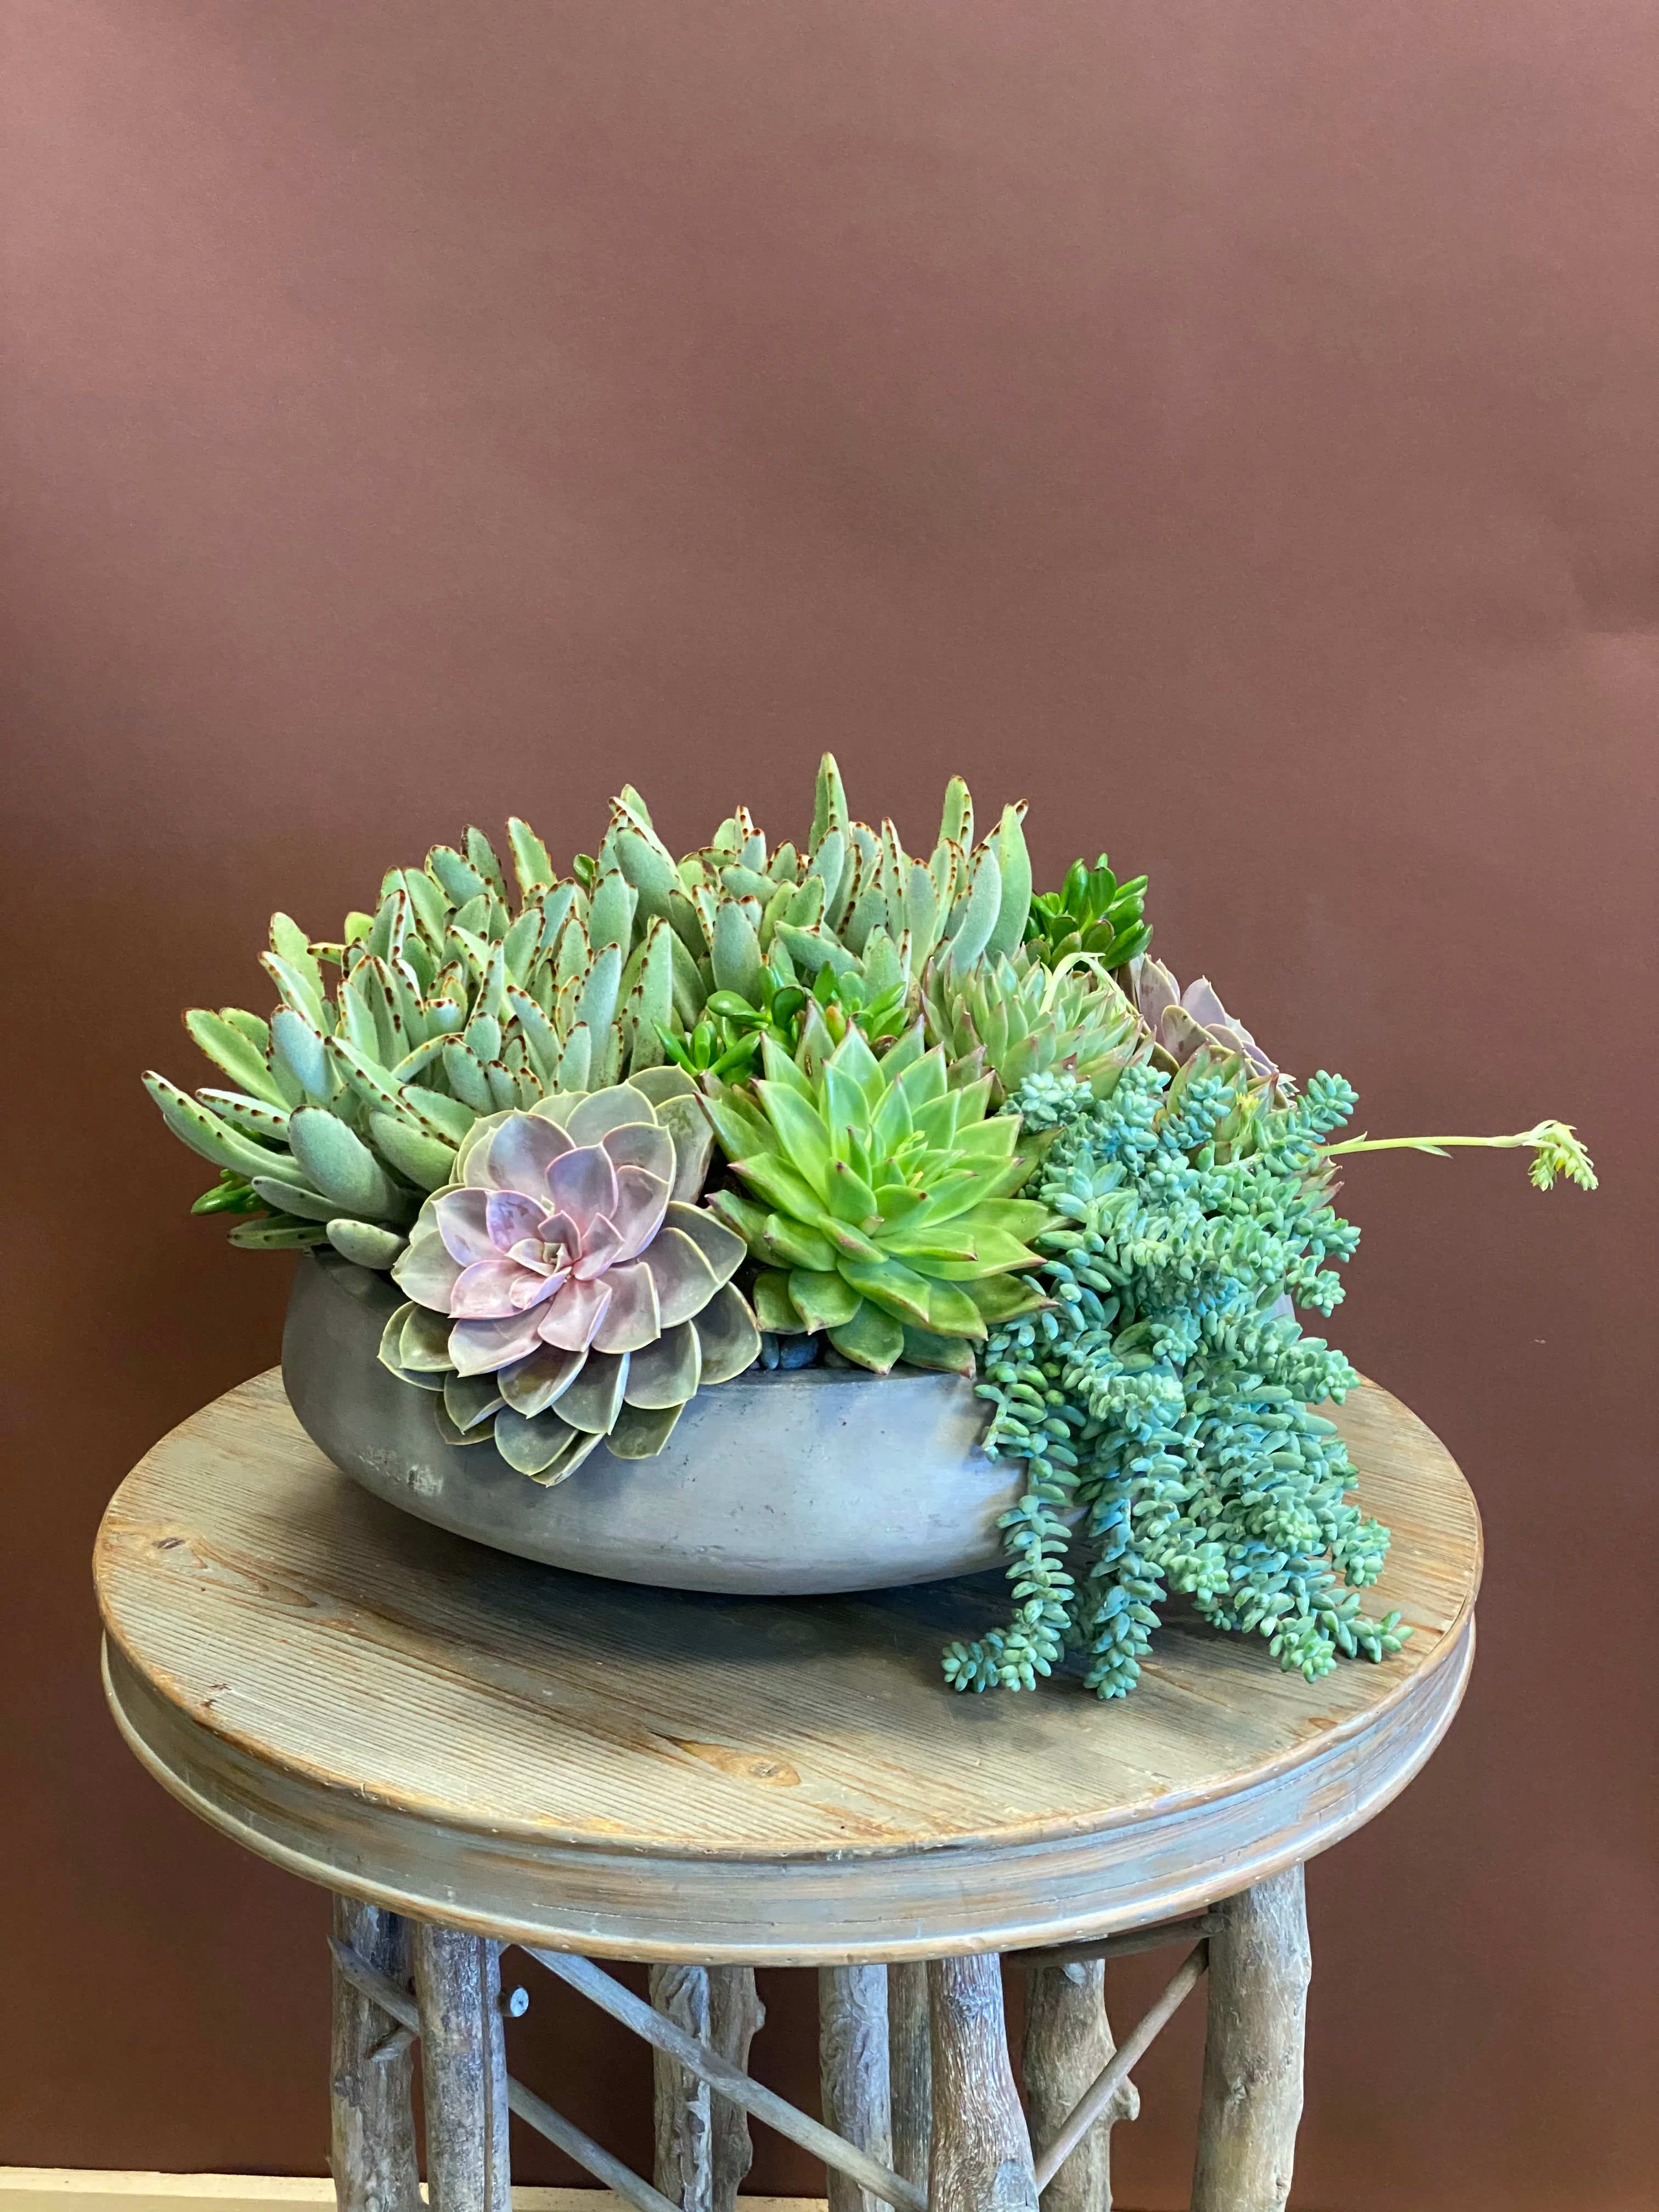 Desert Beauty - Bring some tranquil to your space. These beautiful arrangement of succulents bring a sense of calm and last long with care. If you need a refresh, you can always bring back to us to replenish. 